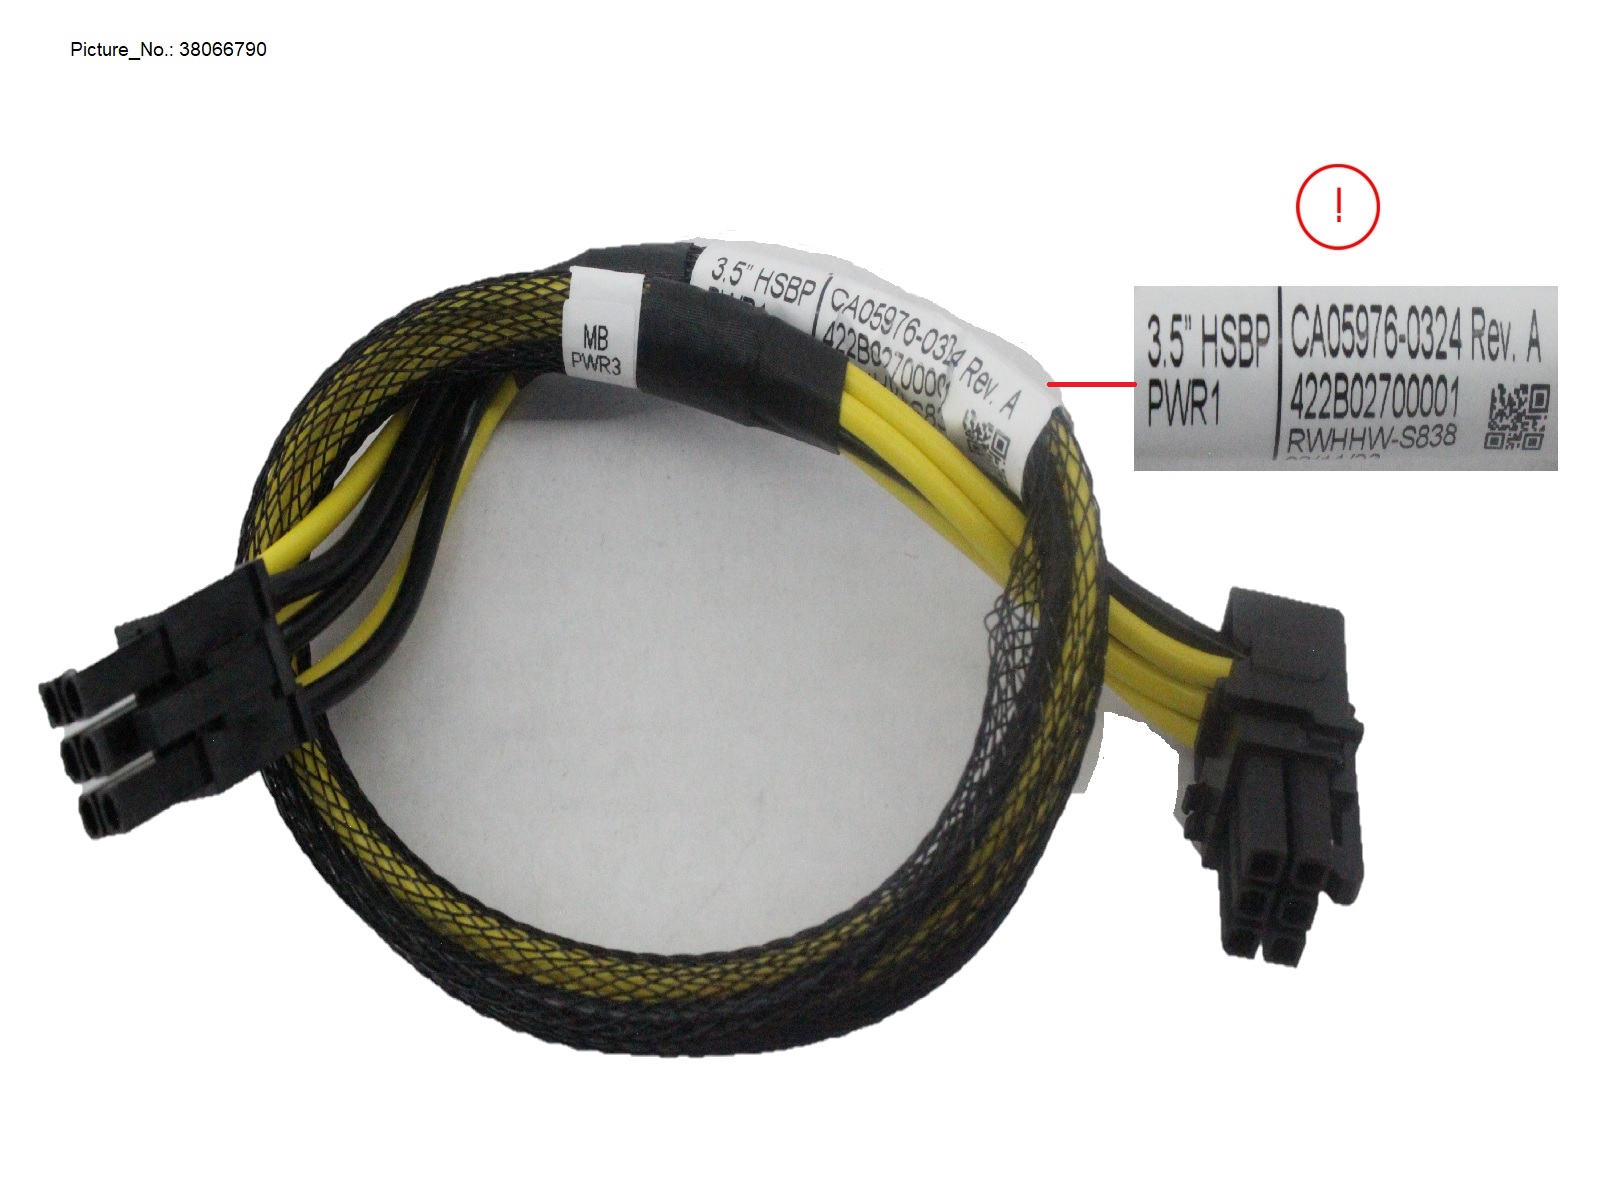 POWER CABLE, MB TO 3.5X4 FHSBP